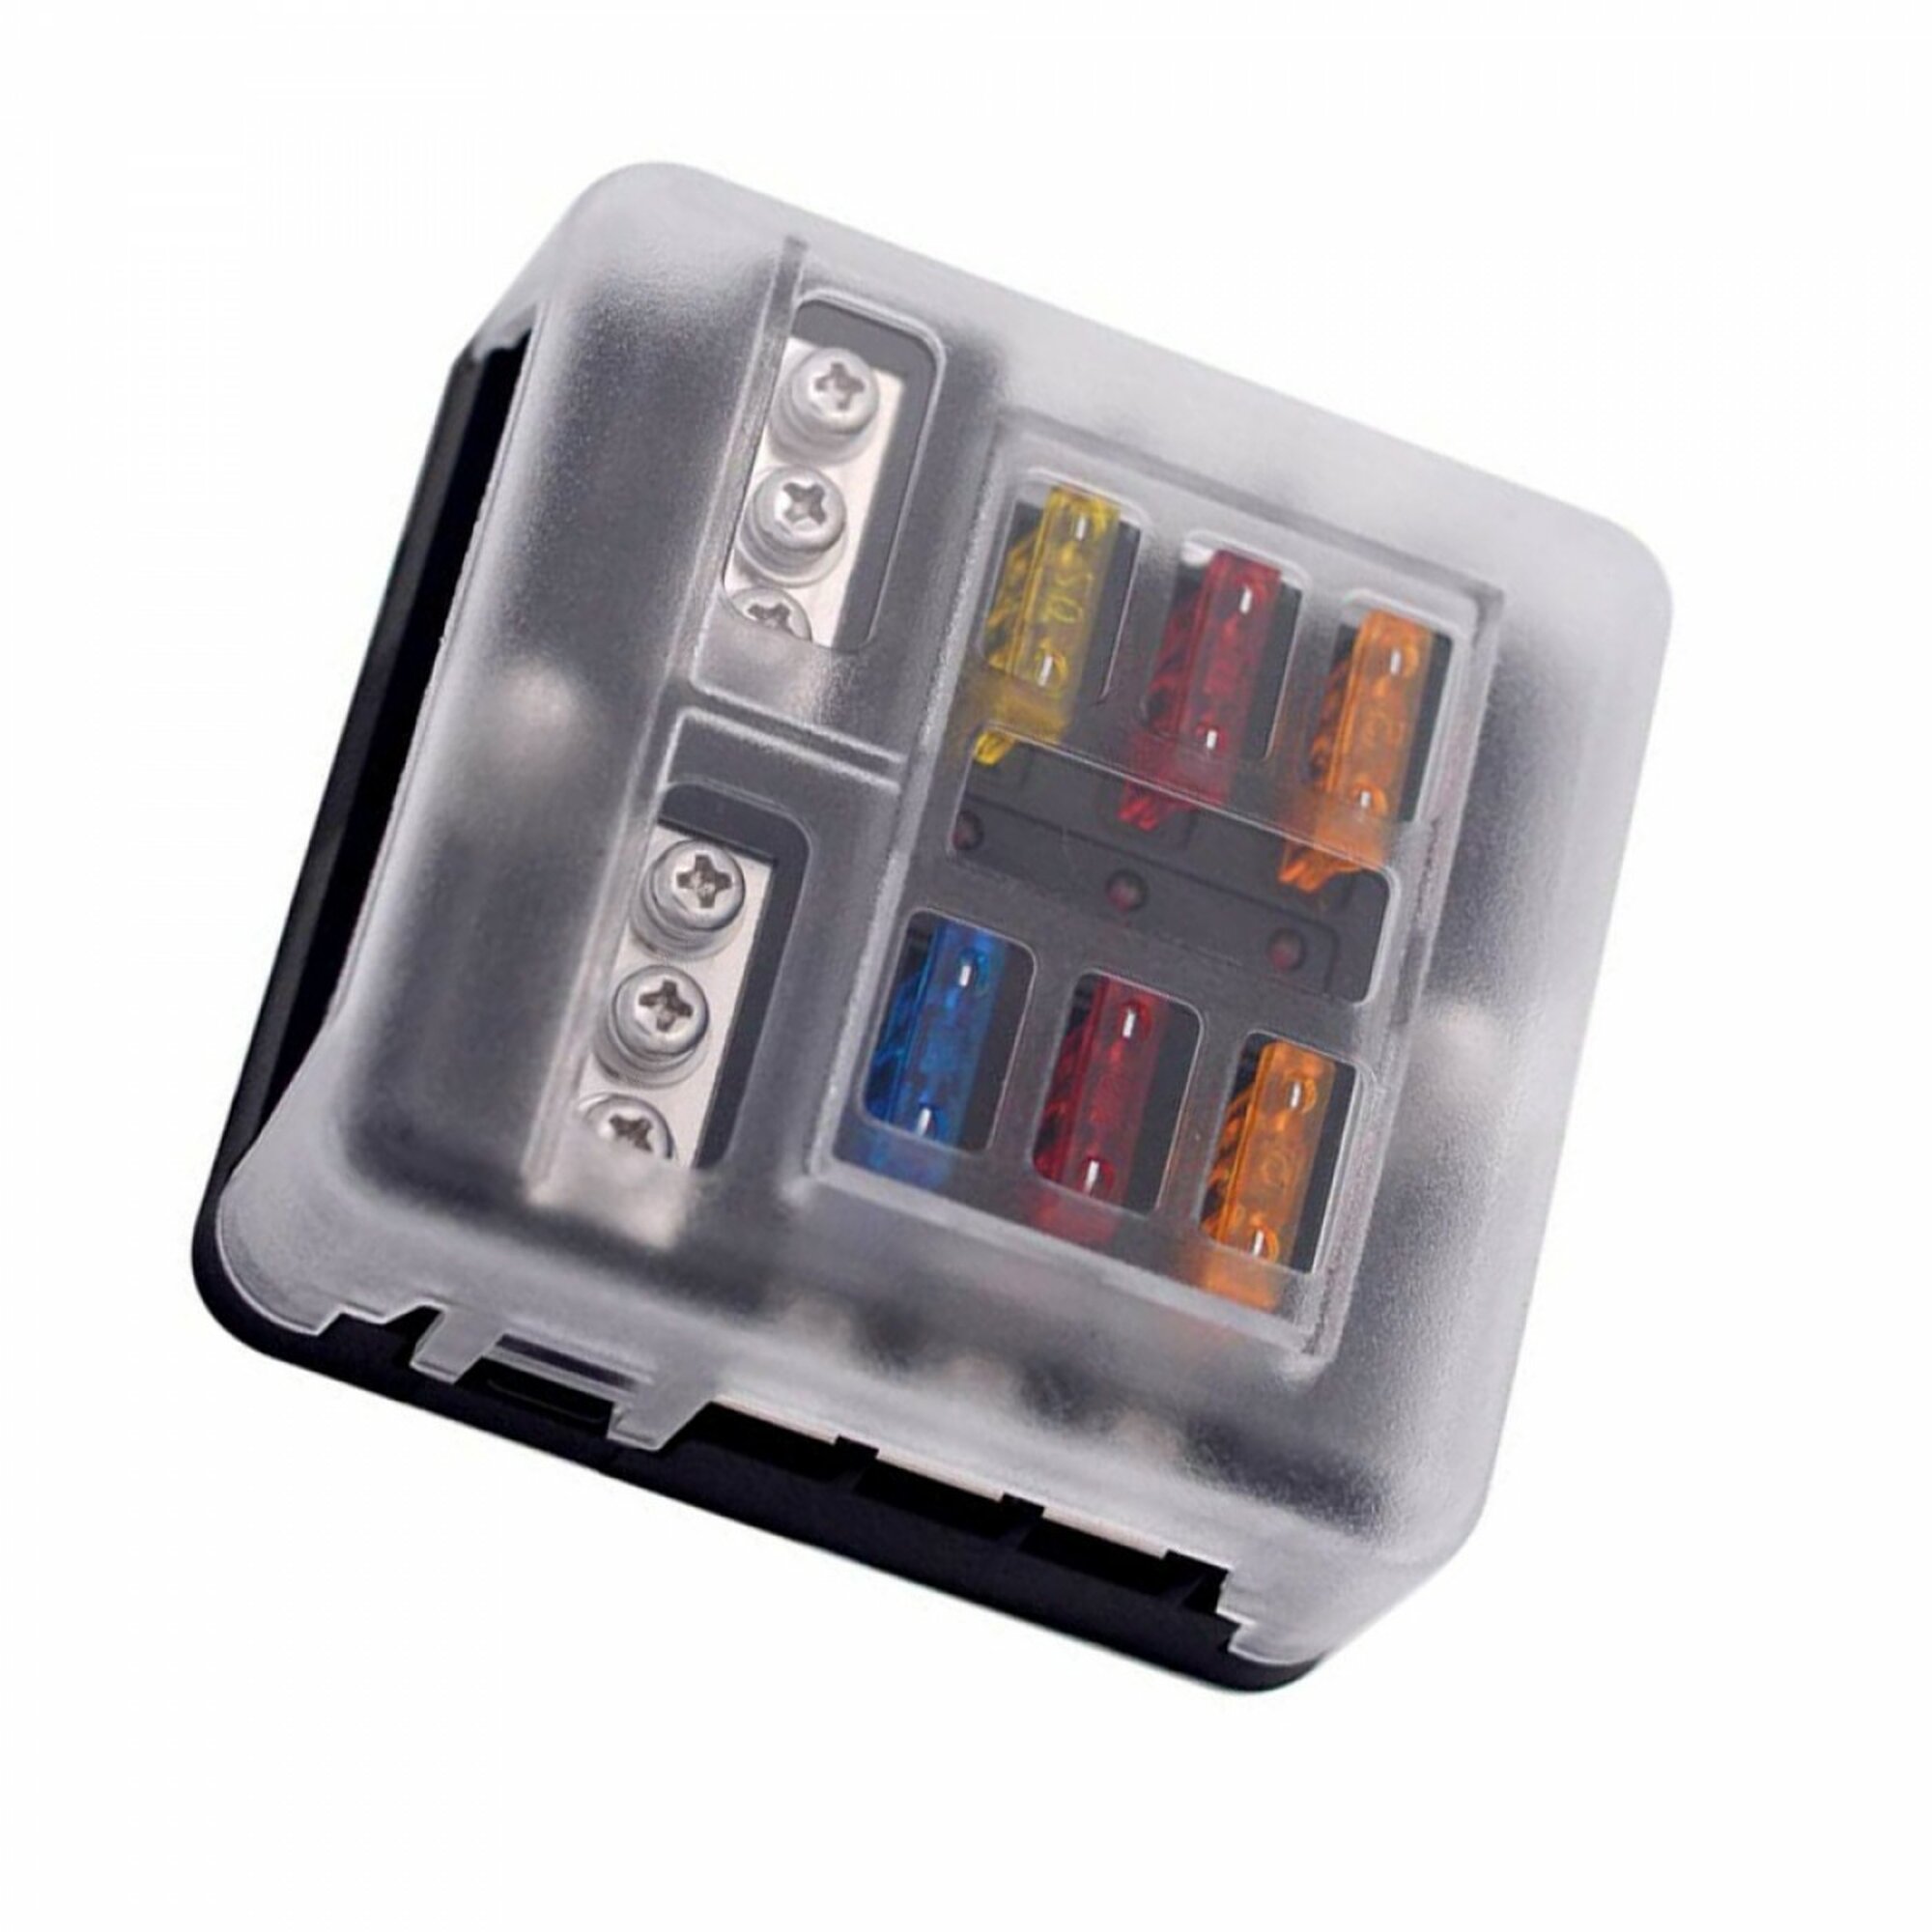 Offgridtec 6-fold security holder for vehicle flax protection with LED display